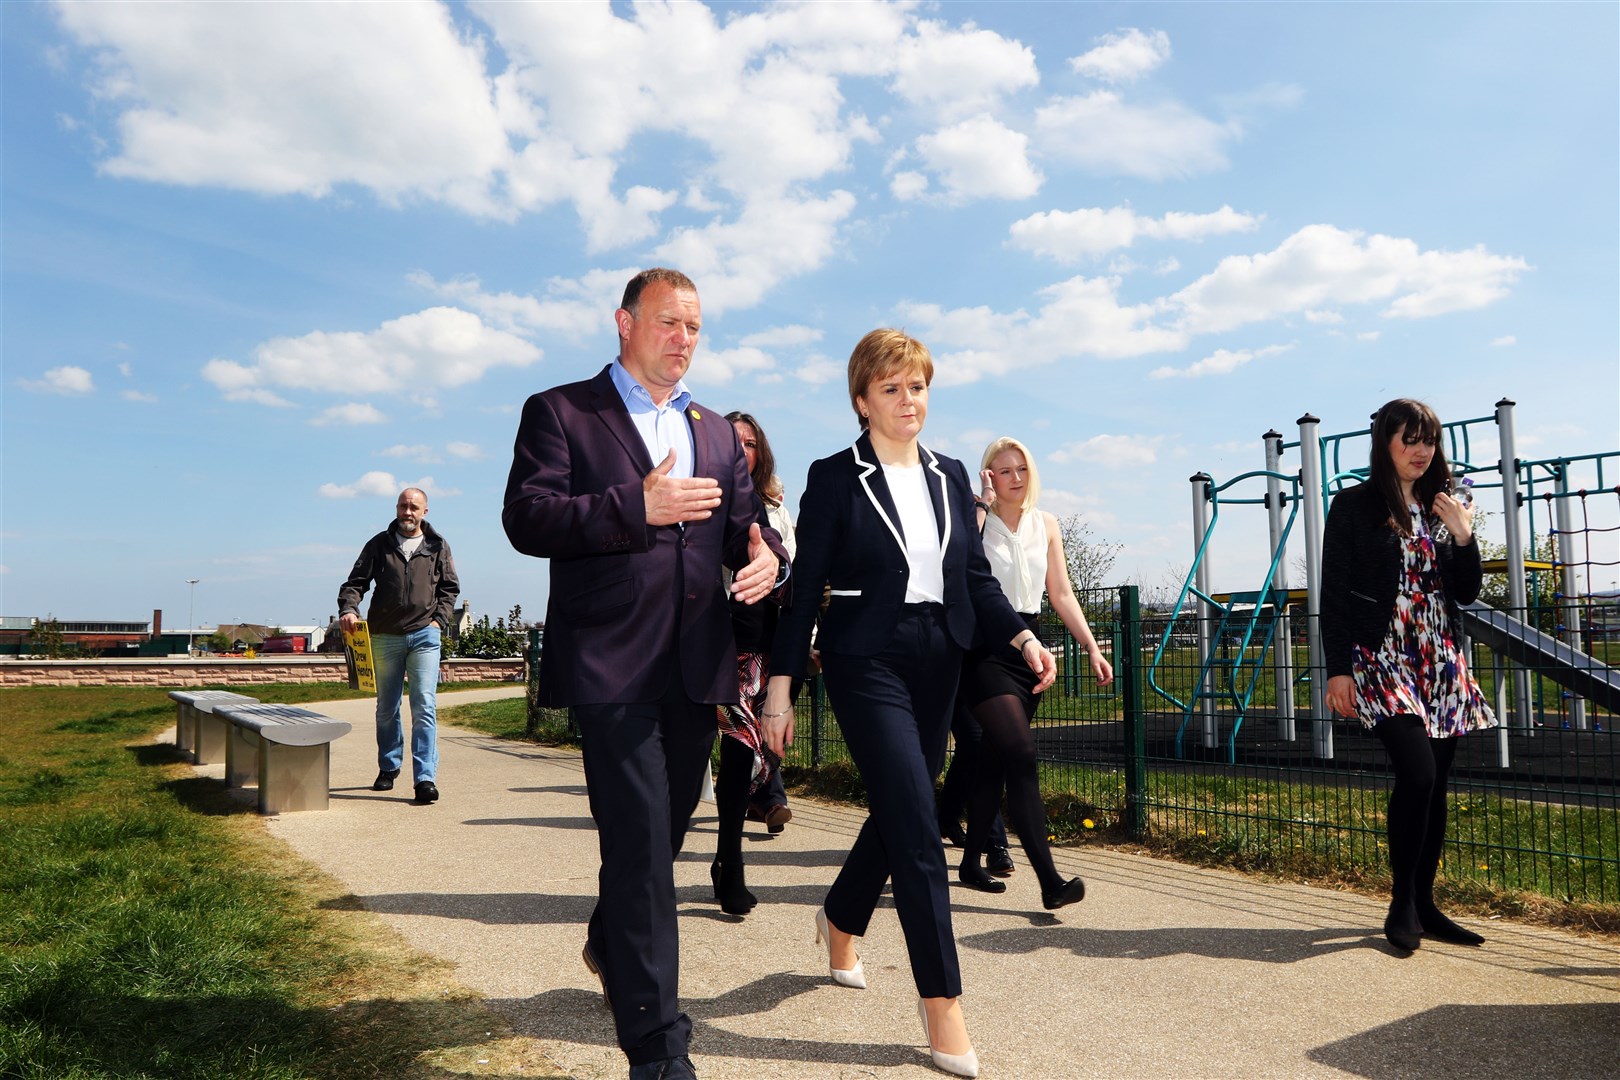 Drew Hendry and Nicola Sturgeon during one of the First Minister's past visits to Inverness.